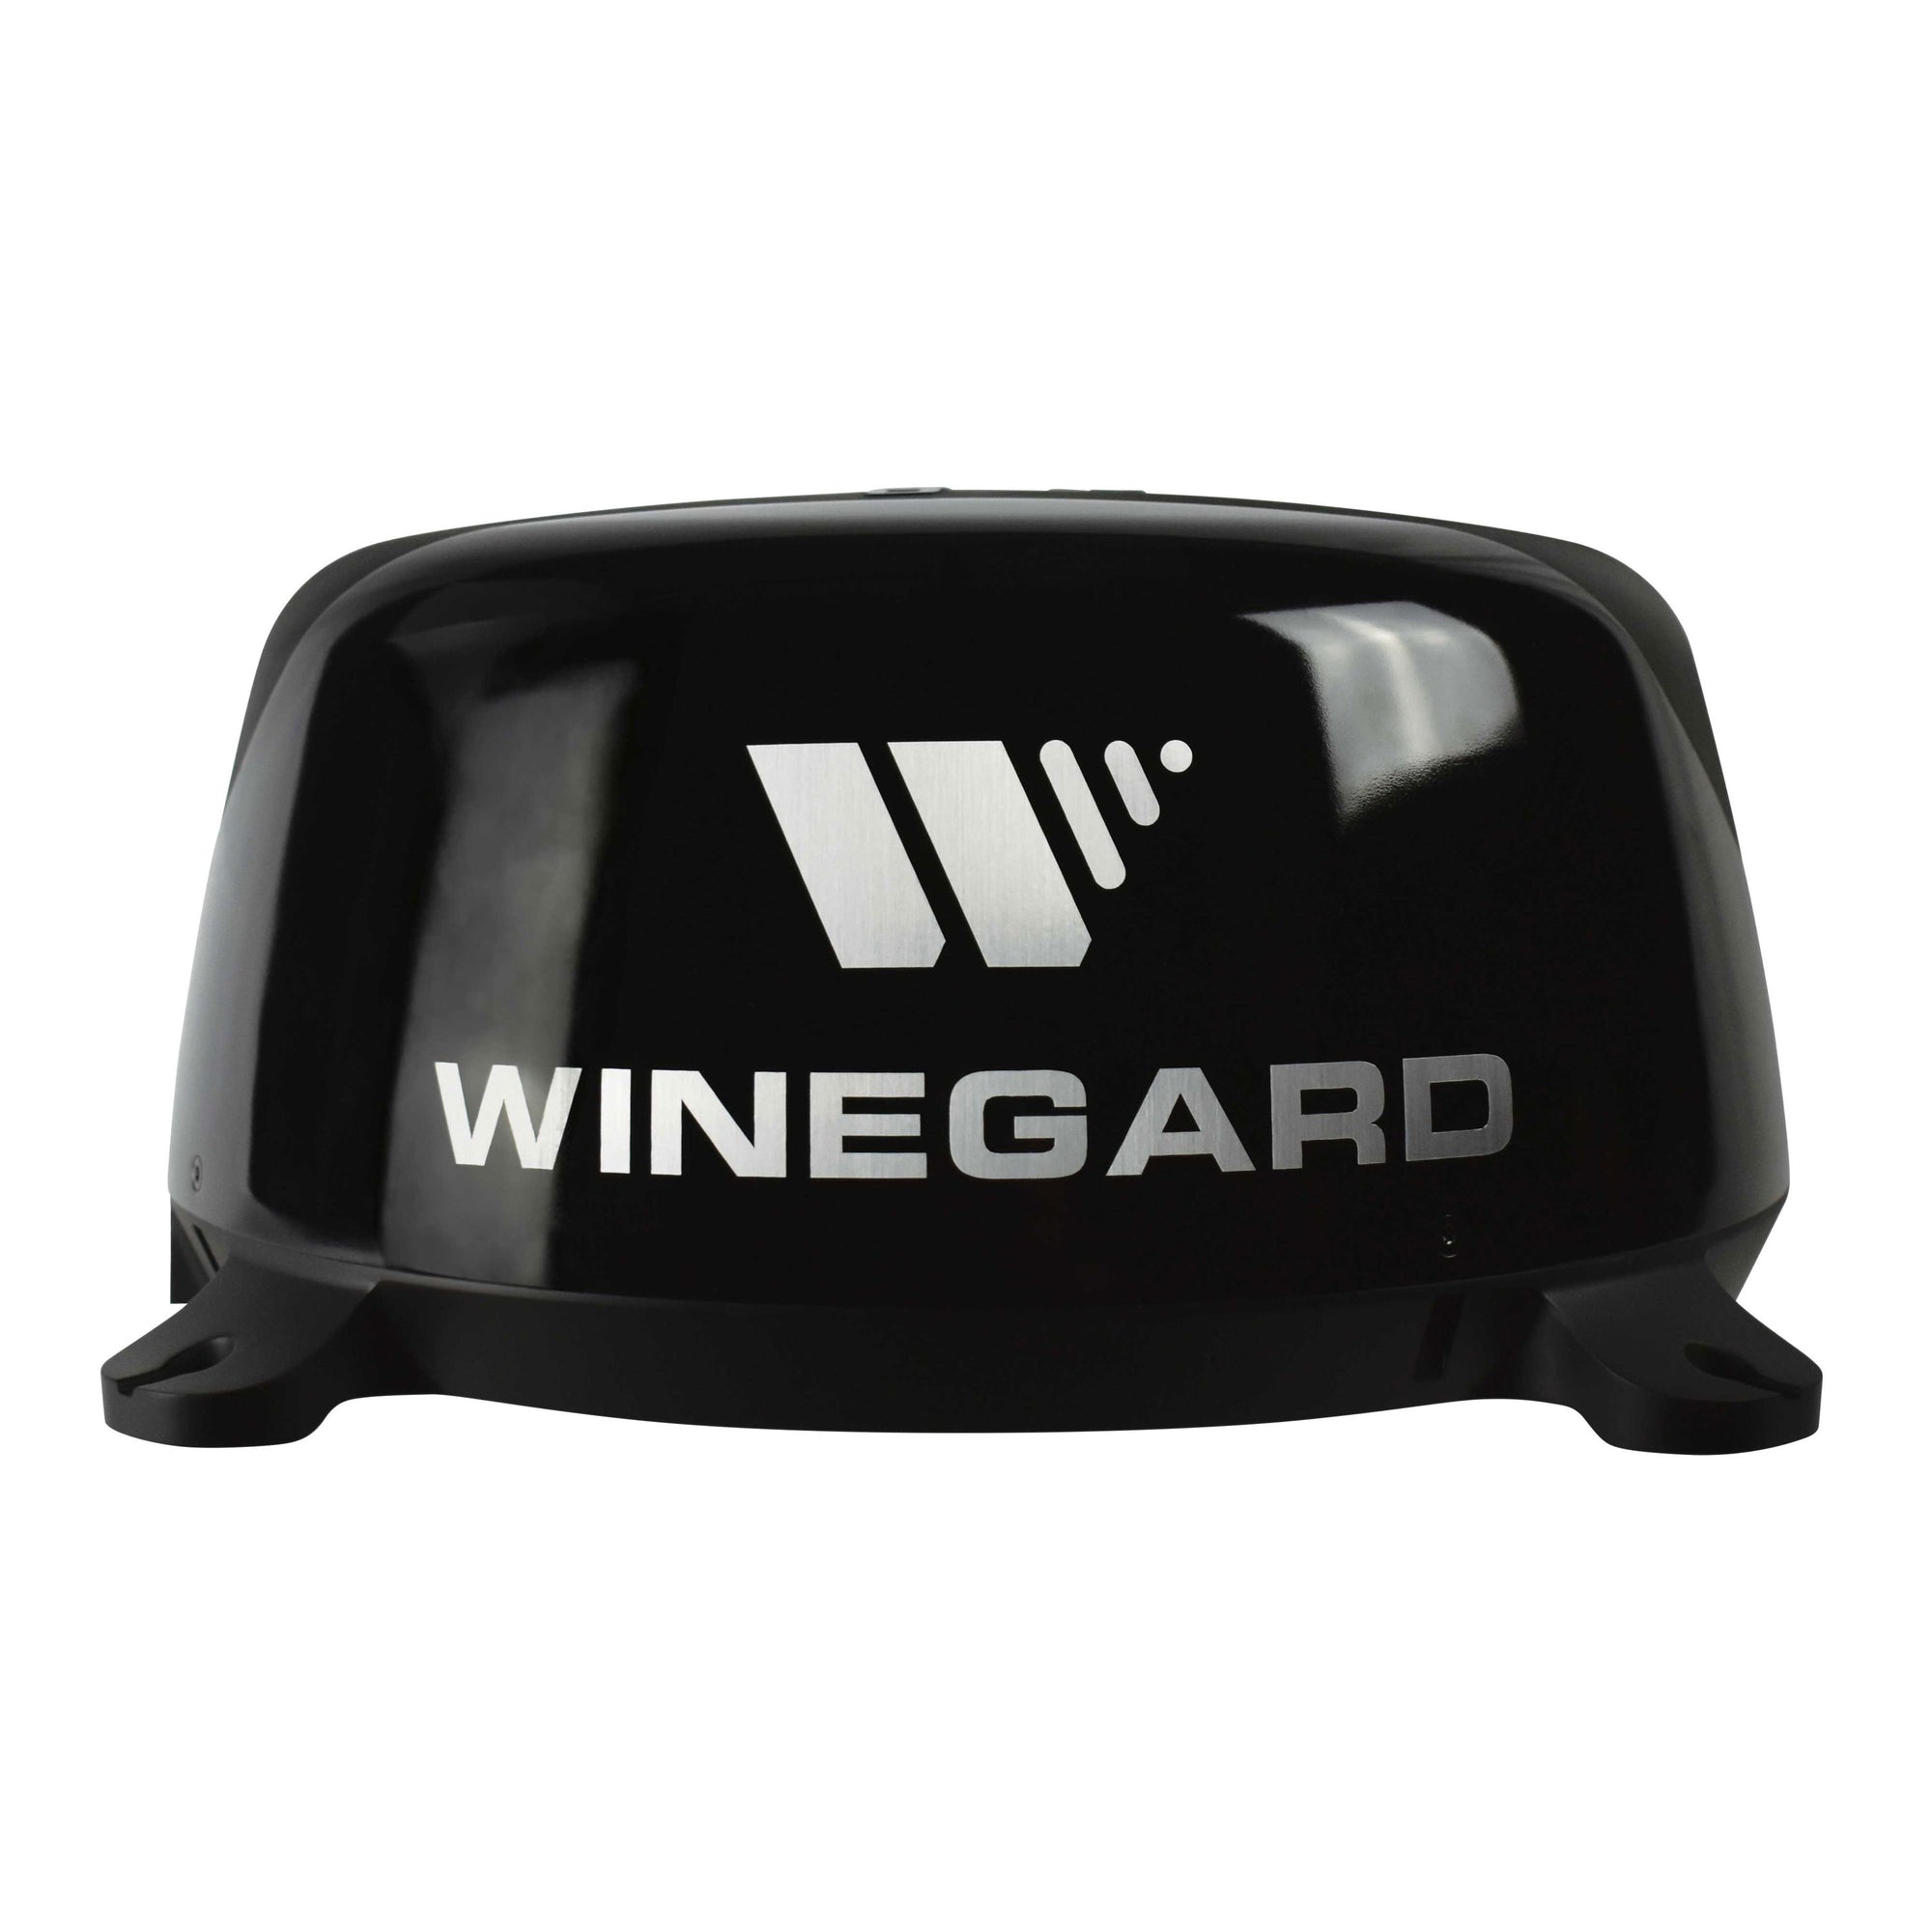 Winegard WF2-435 ConnecT 2.0 4G2 (4G LTE Plus WiFi Extender) for RVs